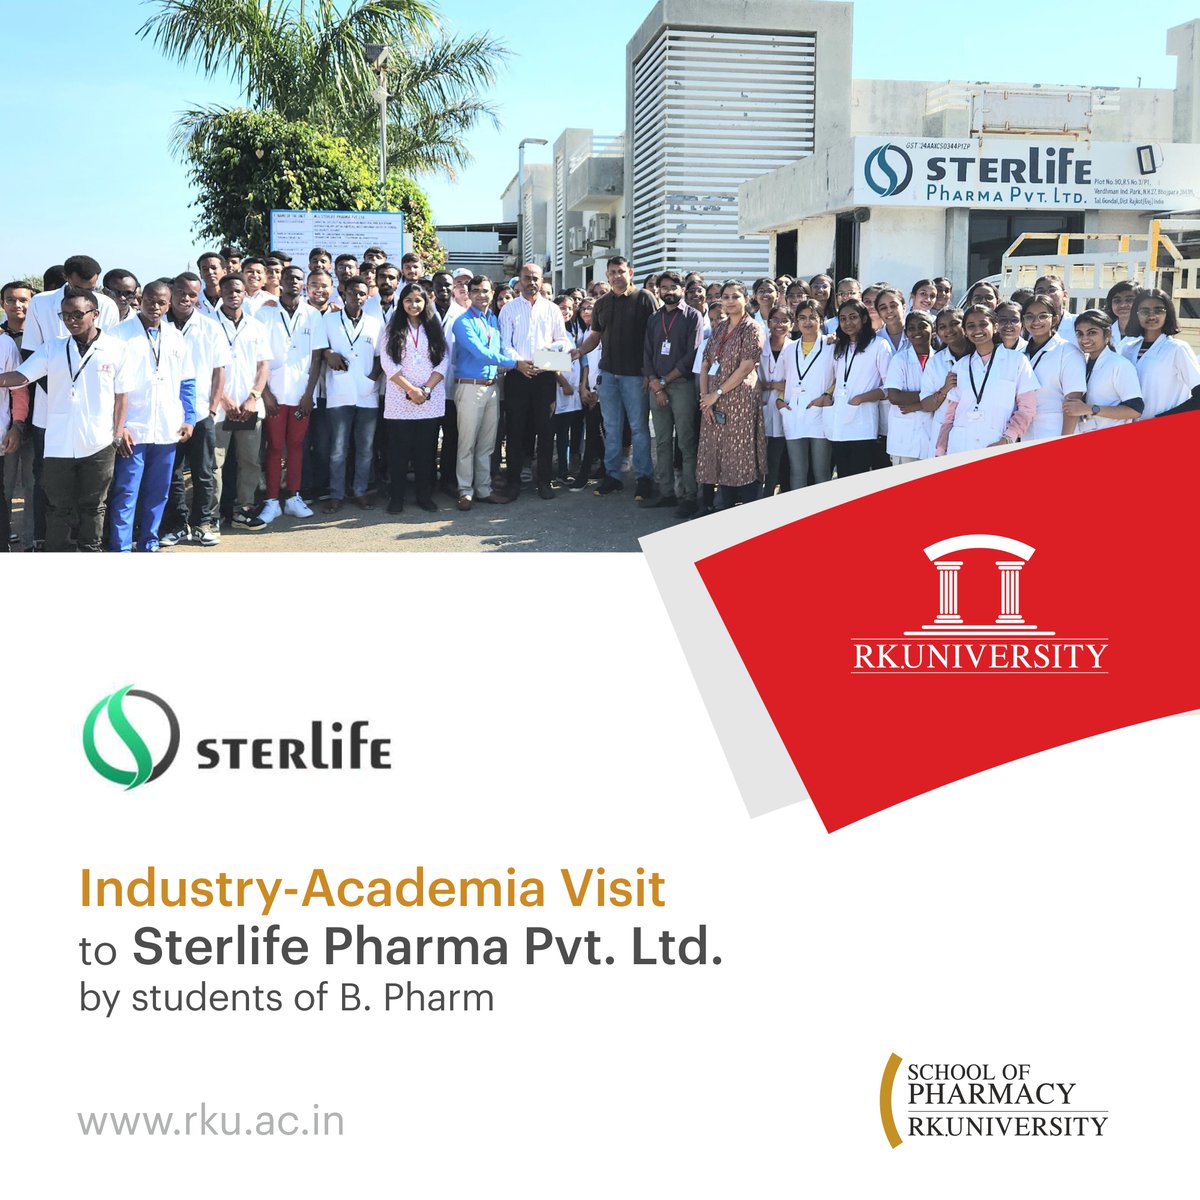 School of Pharmacy, RK University organised an industry-academia visit to Sterlife Pharma Pvt. Ltd. Students learned about manufacturing processes of primary formulations such as tablets and capsules.

#rku #sterlifepharma #pharmacy #pharma #schoolofpharmacy #India #rkuniversity